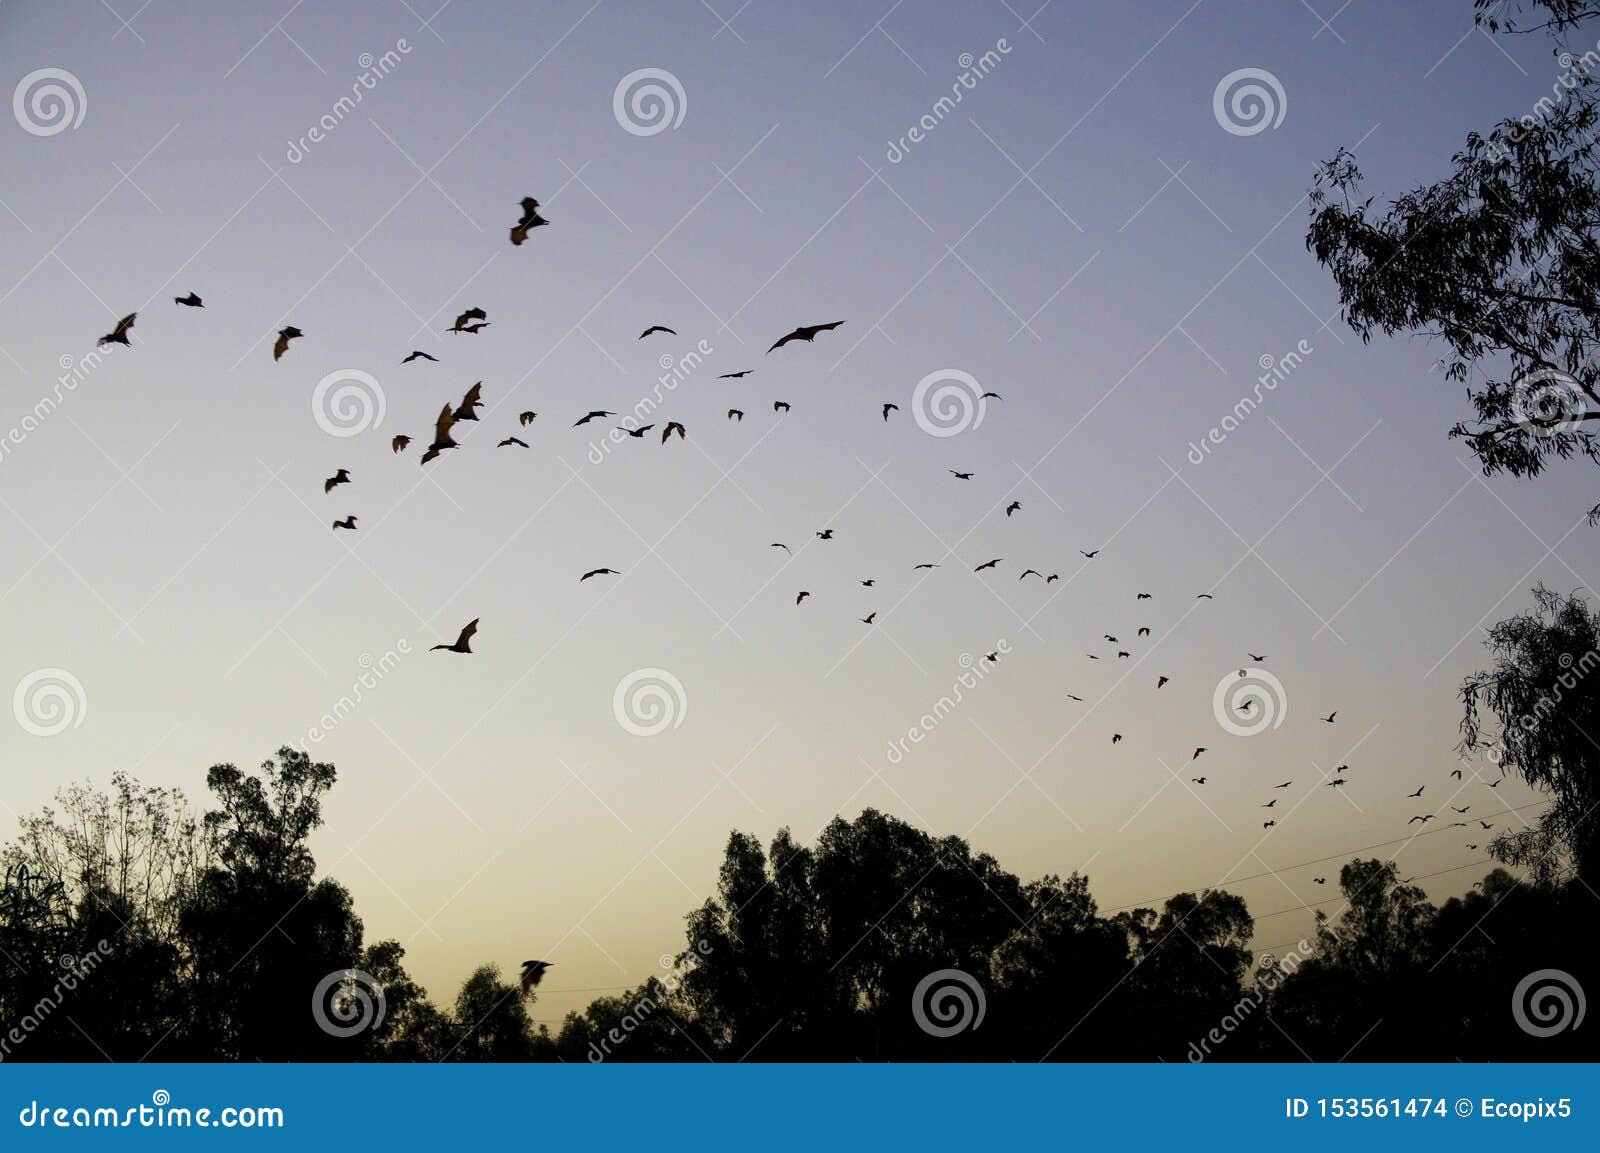 flying foxes fruit bats fly in orderly column